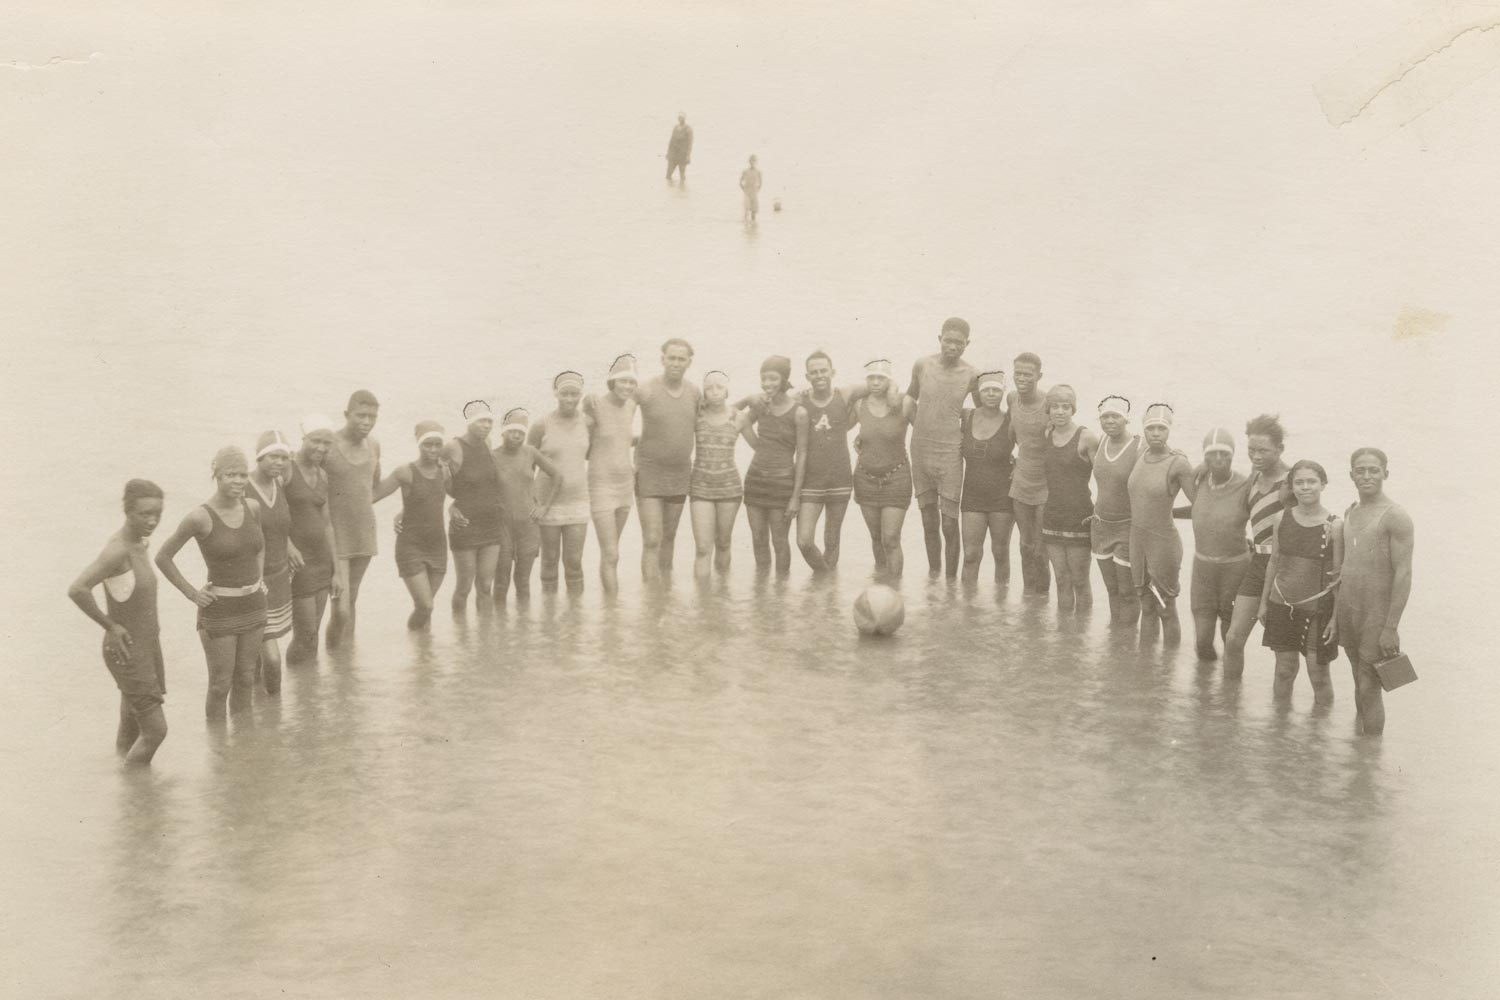 Visitors to Gulfside Assembly, an African-American religious resort in Waveland, Mississippi, bathing in the Gulf of Mexico in the 1920s. (Photographs and Prints Division, Schomburg Center for Research in Black Culture, New York Public Library, Astor, Lenox and Tilden Foundations) 